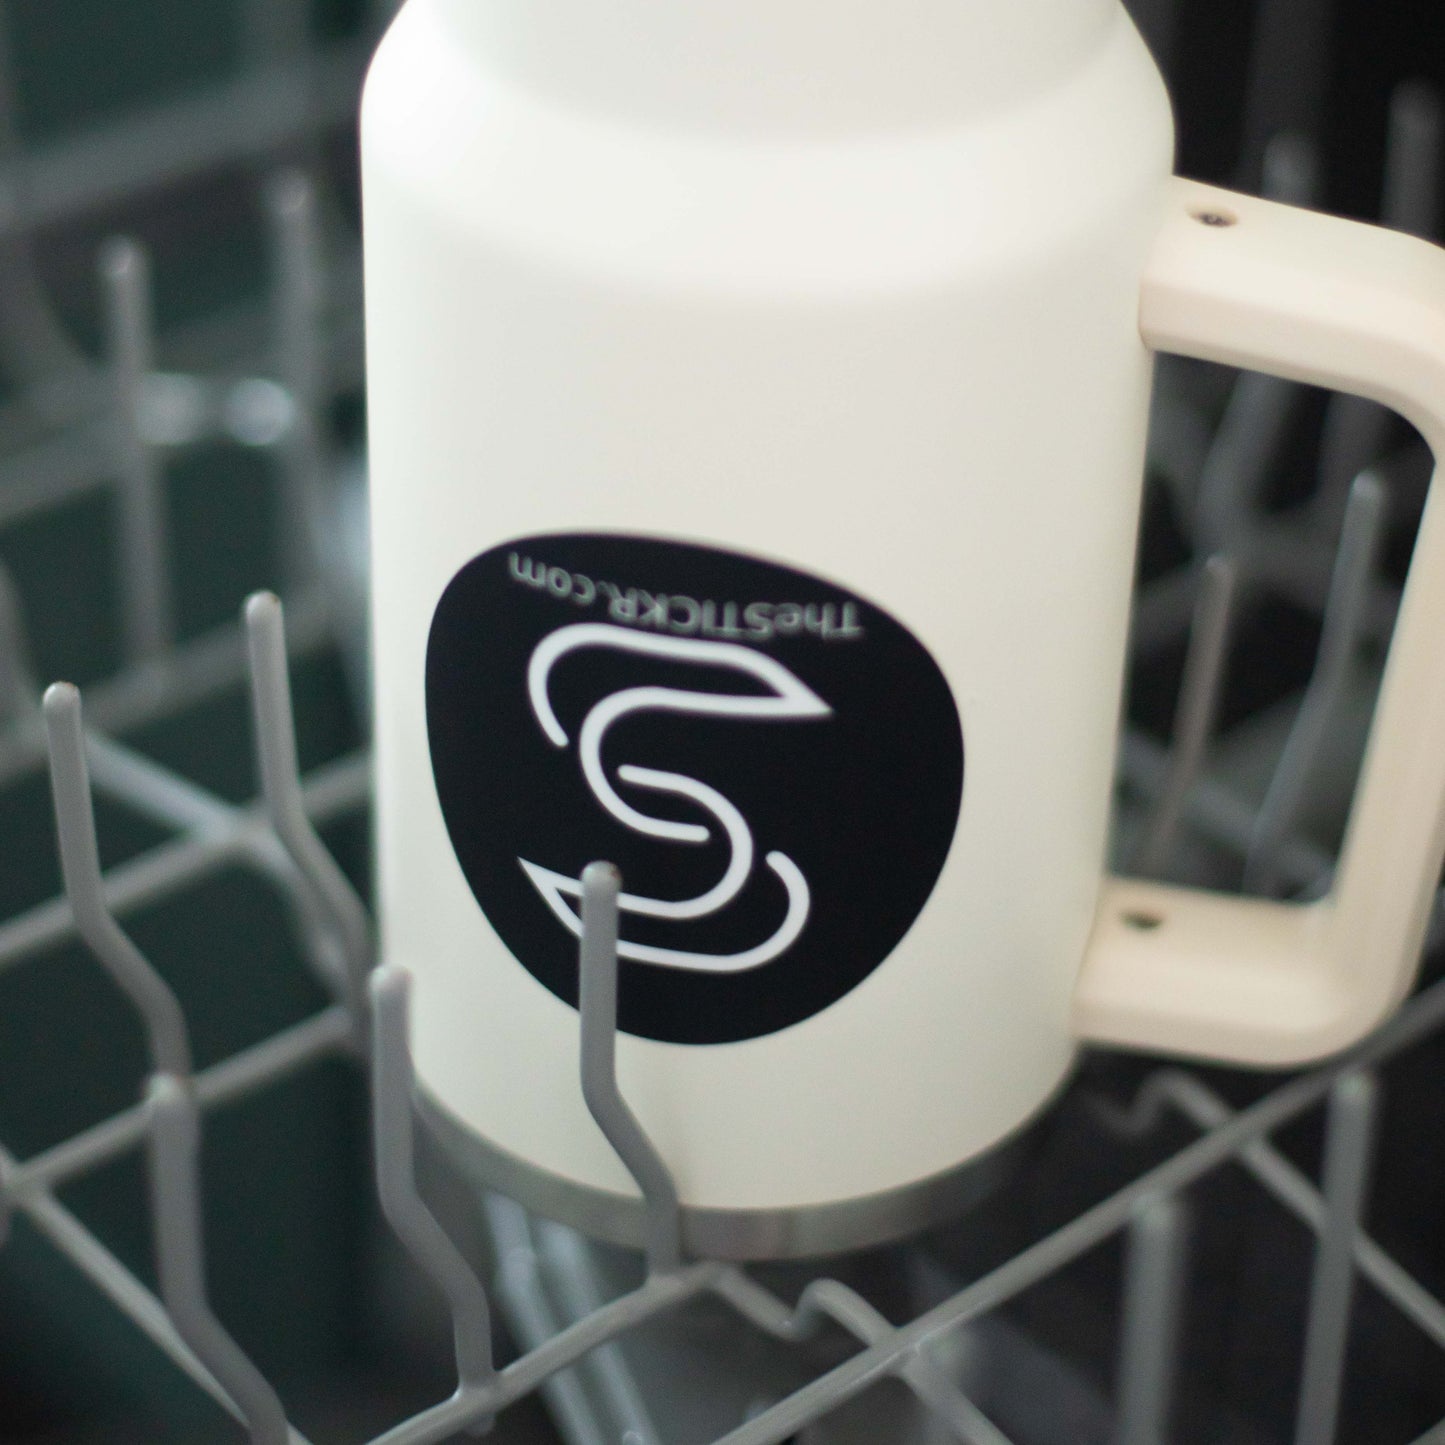 A black circular vinyl sticker of the Stickr logo and website on a water bottle in a dishwasher